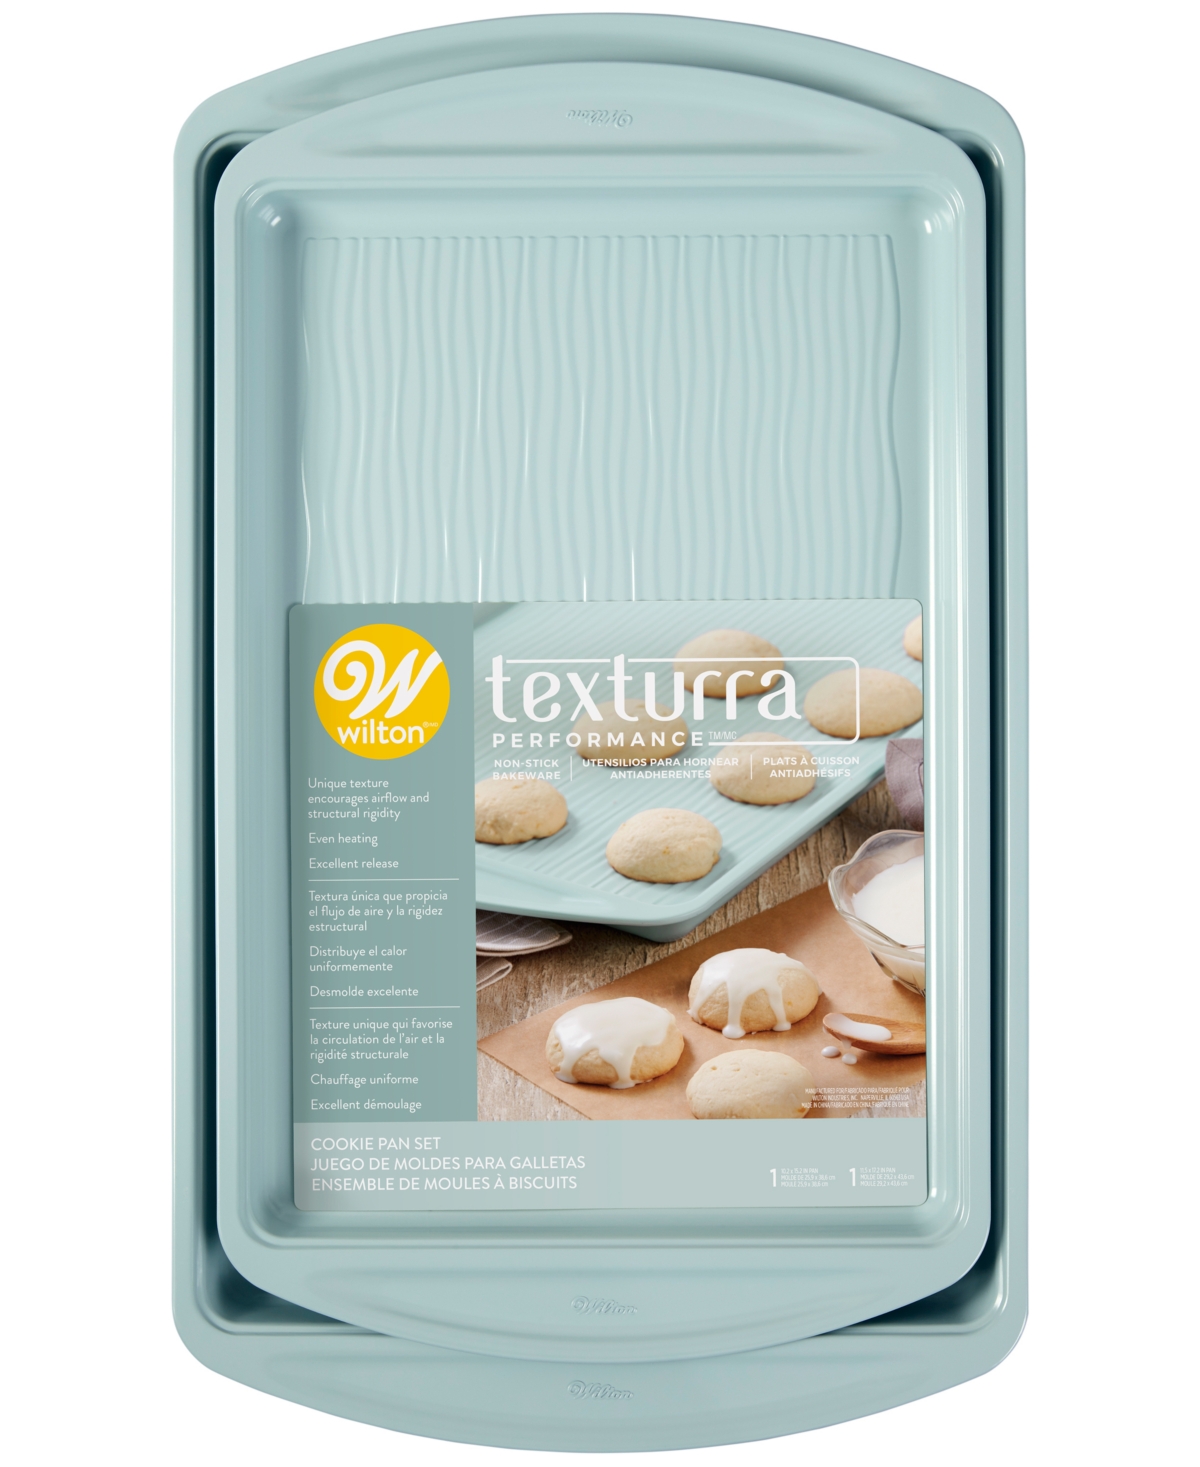 UPC 070896011862 product image for Wilton Texturra Wave Cookie Pans, Set of 2 | upcitemdb.com